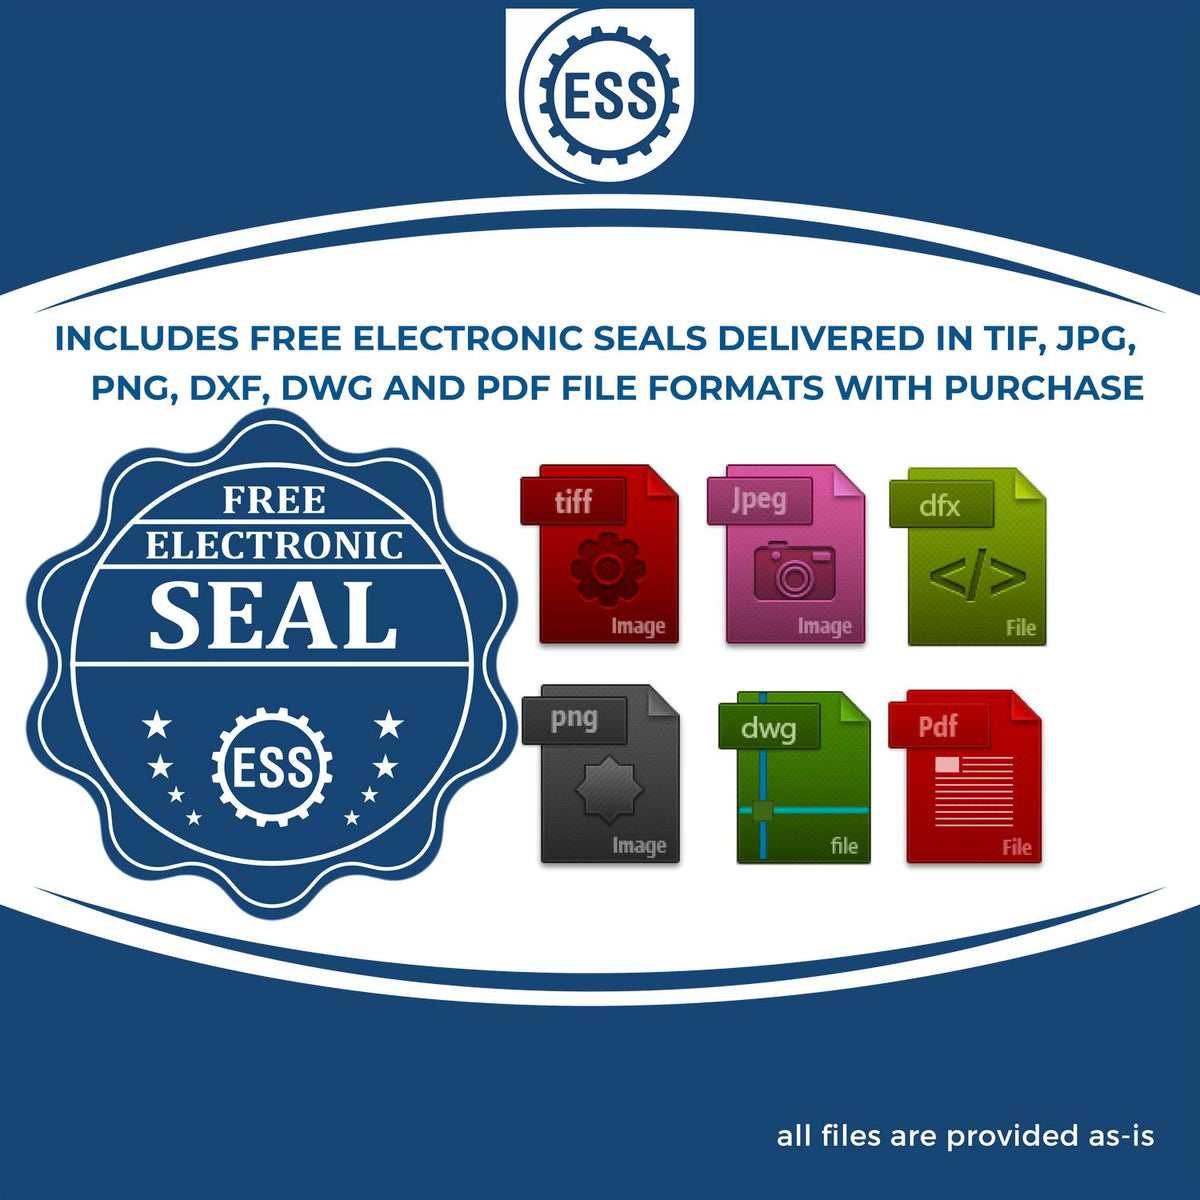 An infographic for the free electronic seal for the Hybrid North Carolina Geologist Seal illustrating the different file type icons such as DXF, DWG, TIF, JPG and PNG.